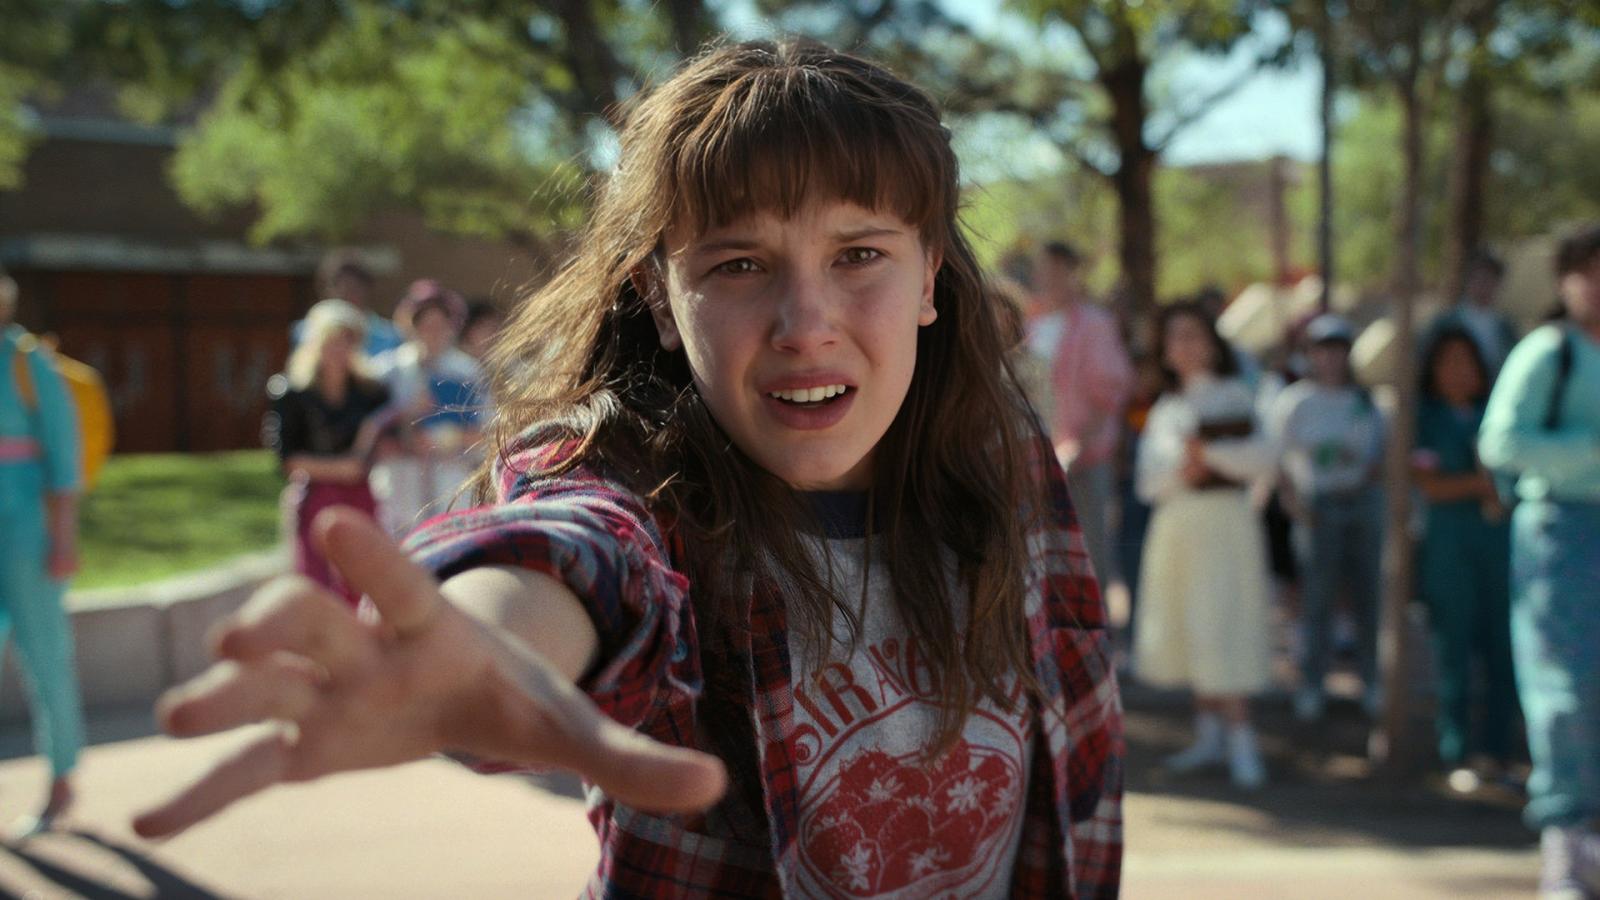 Which Stranger Things Character Are You Based On Your Zodiac Sign? - image 1